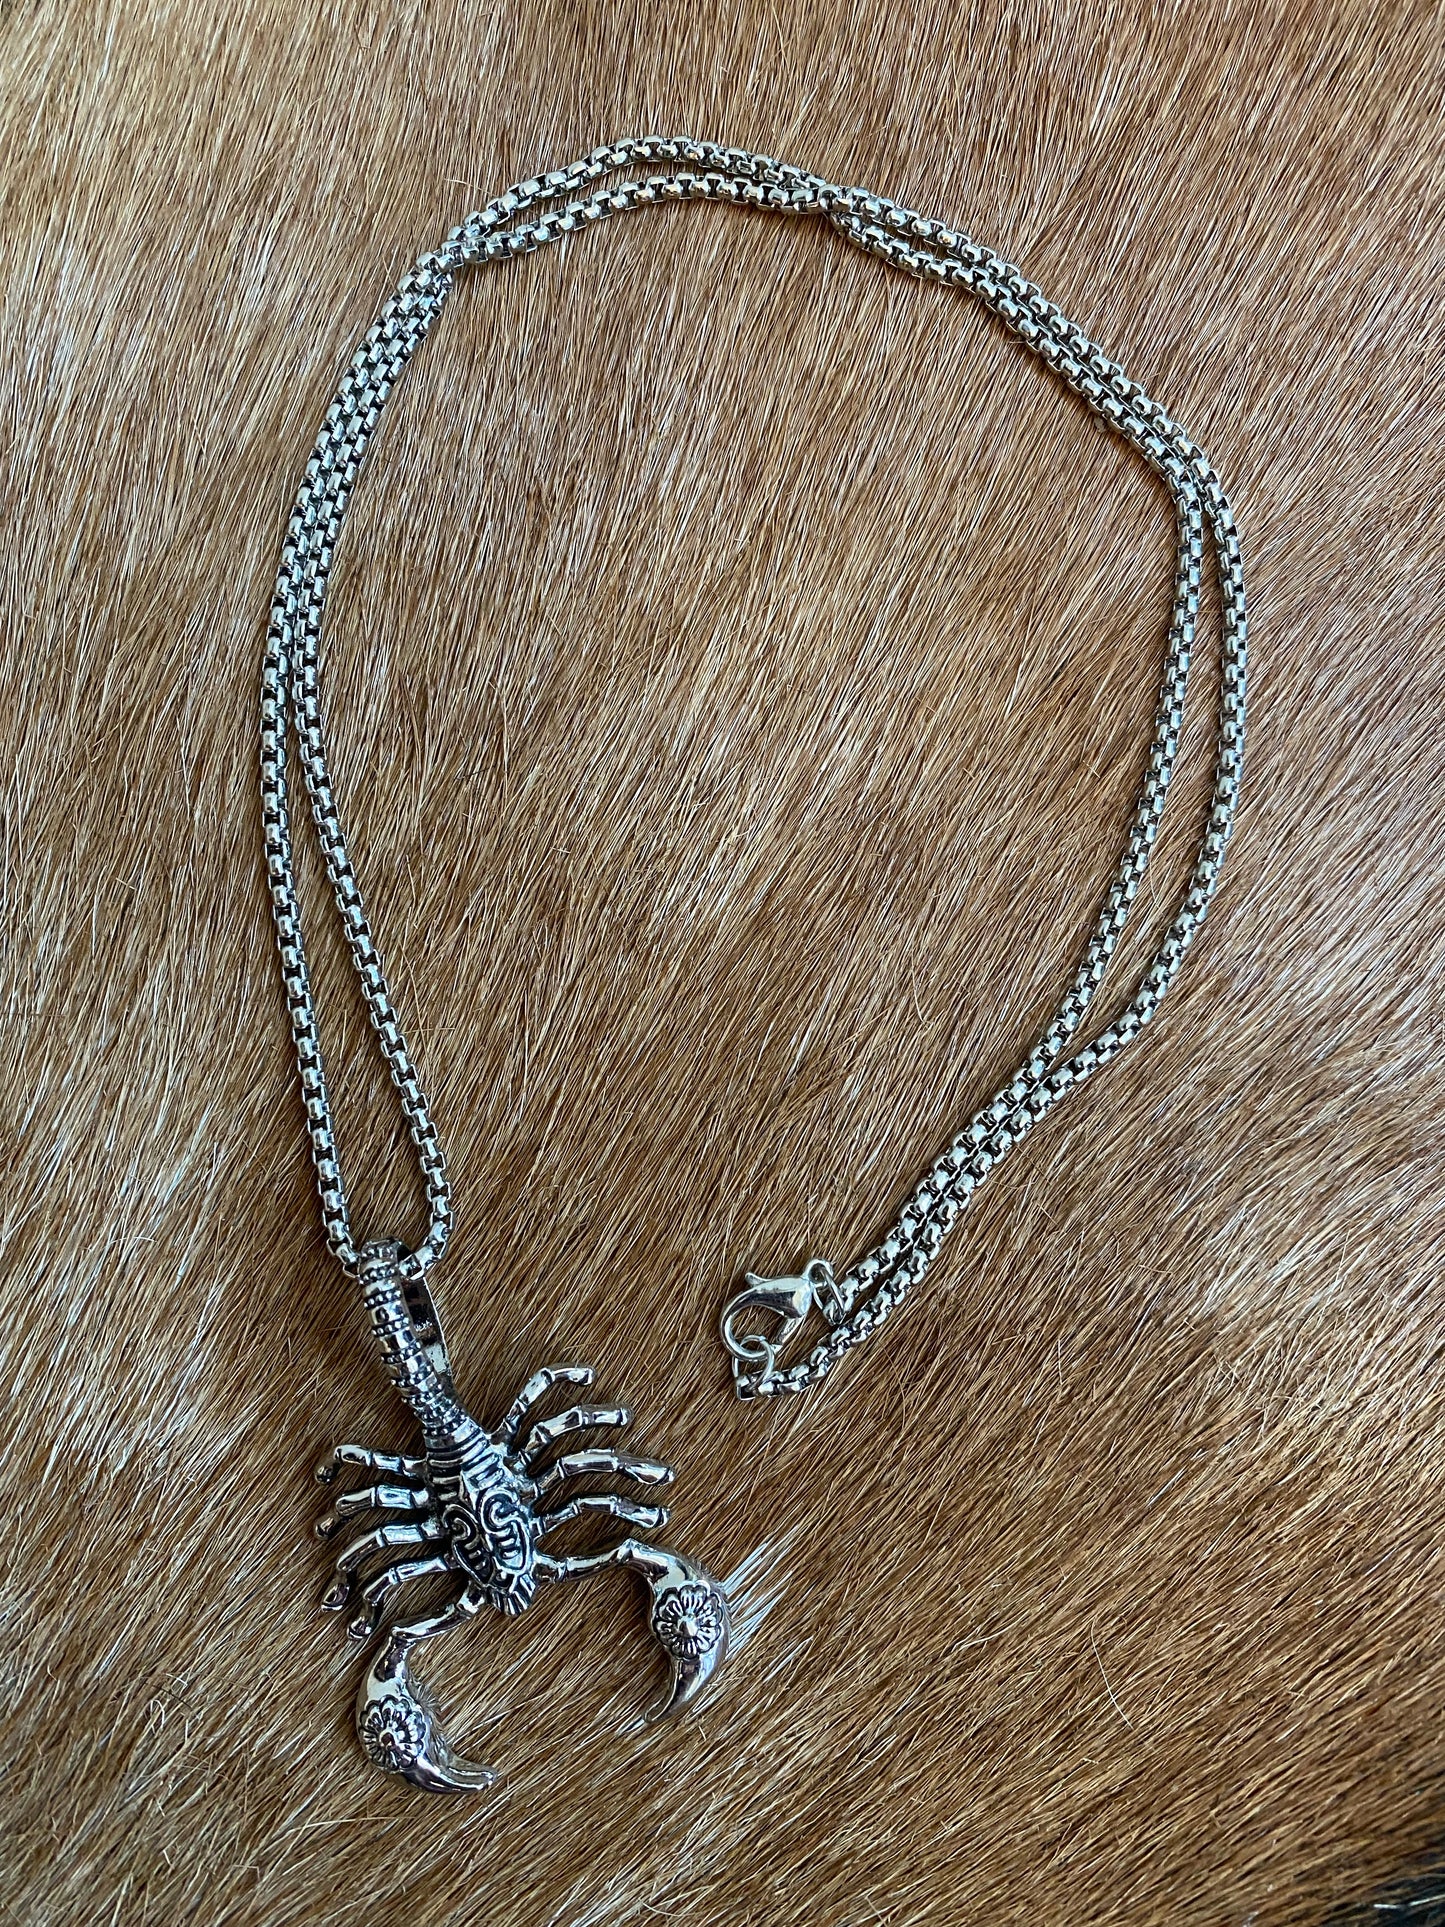 Large Silver Scorpion Necklace